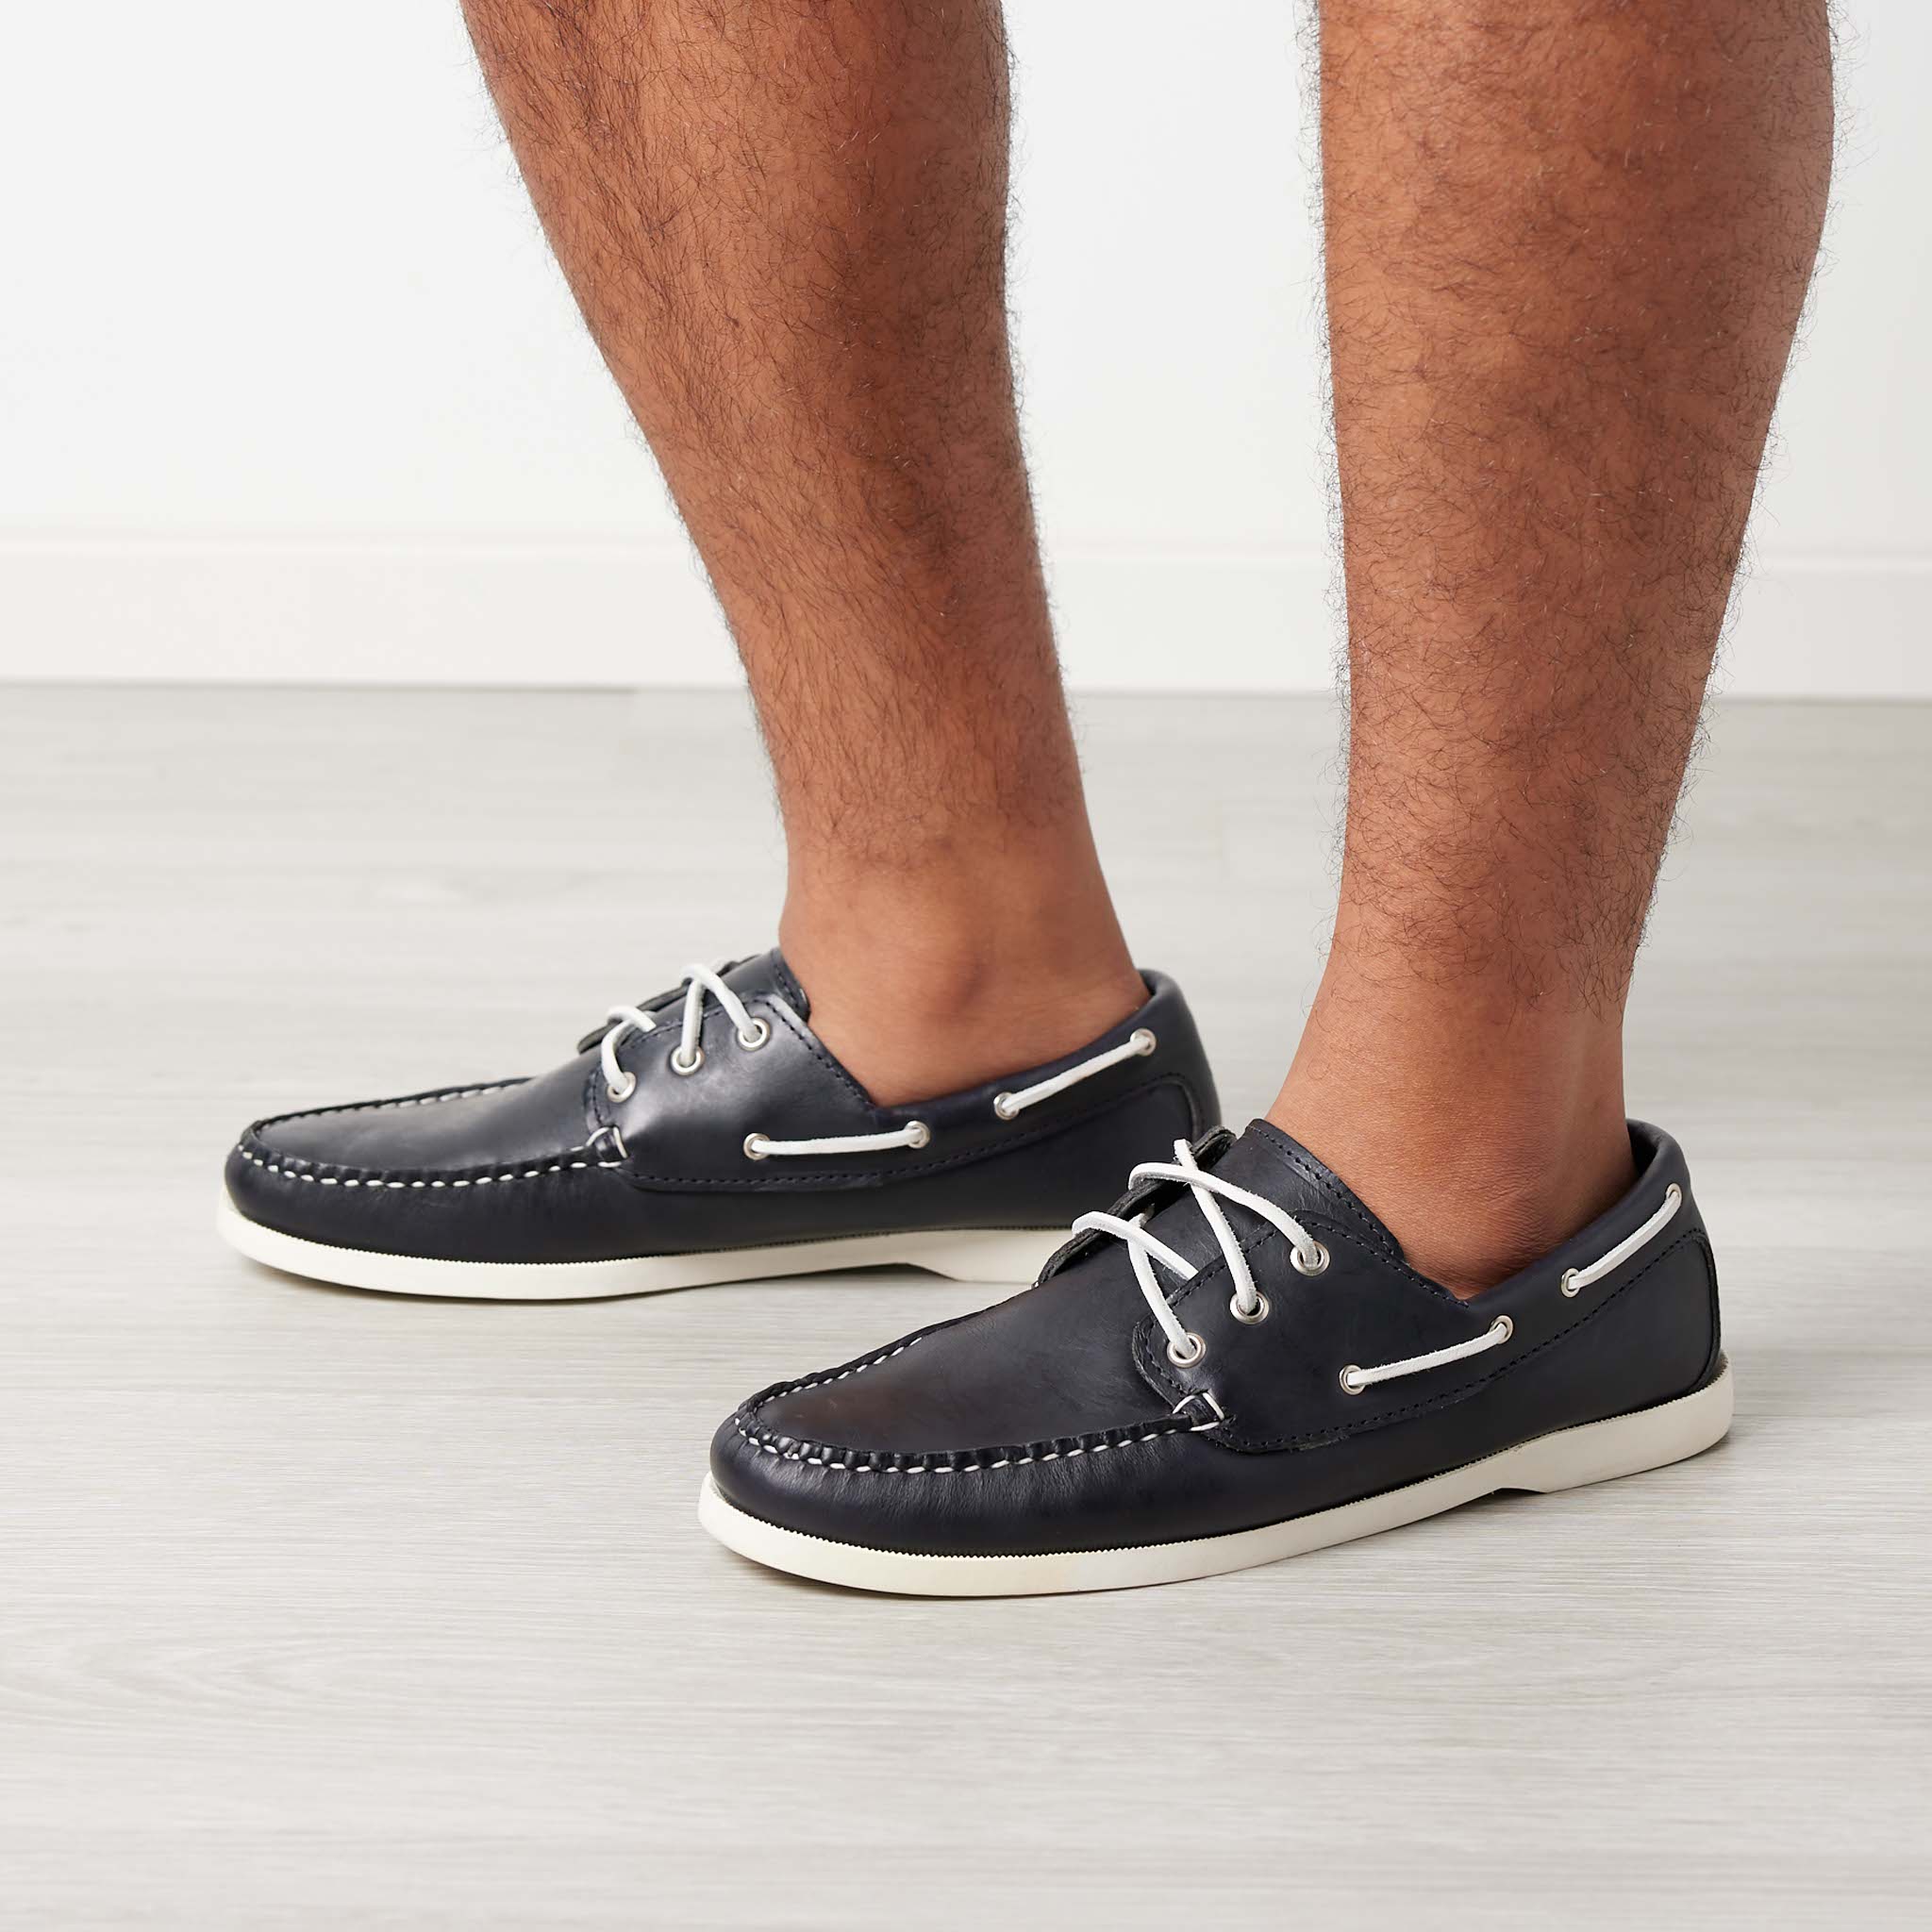 Casual Look with Black Boat Shoes